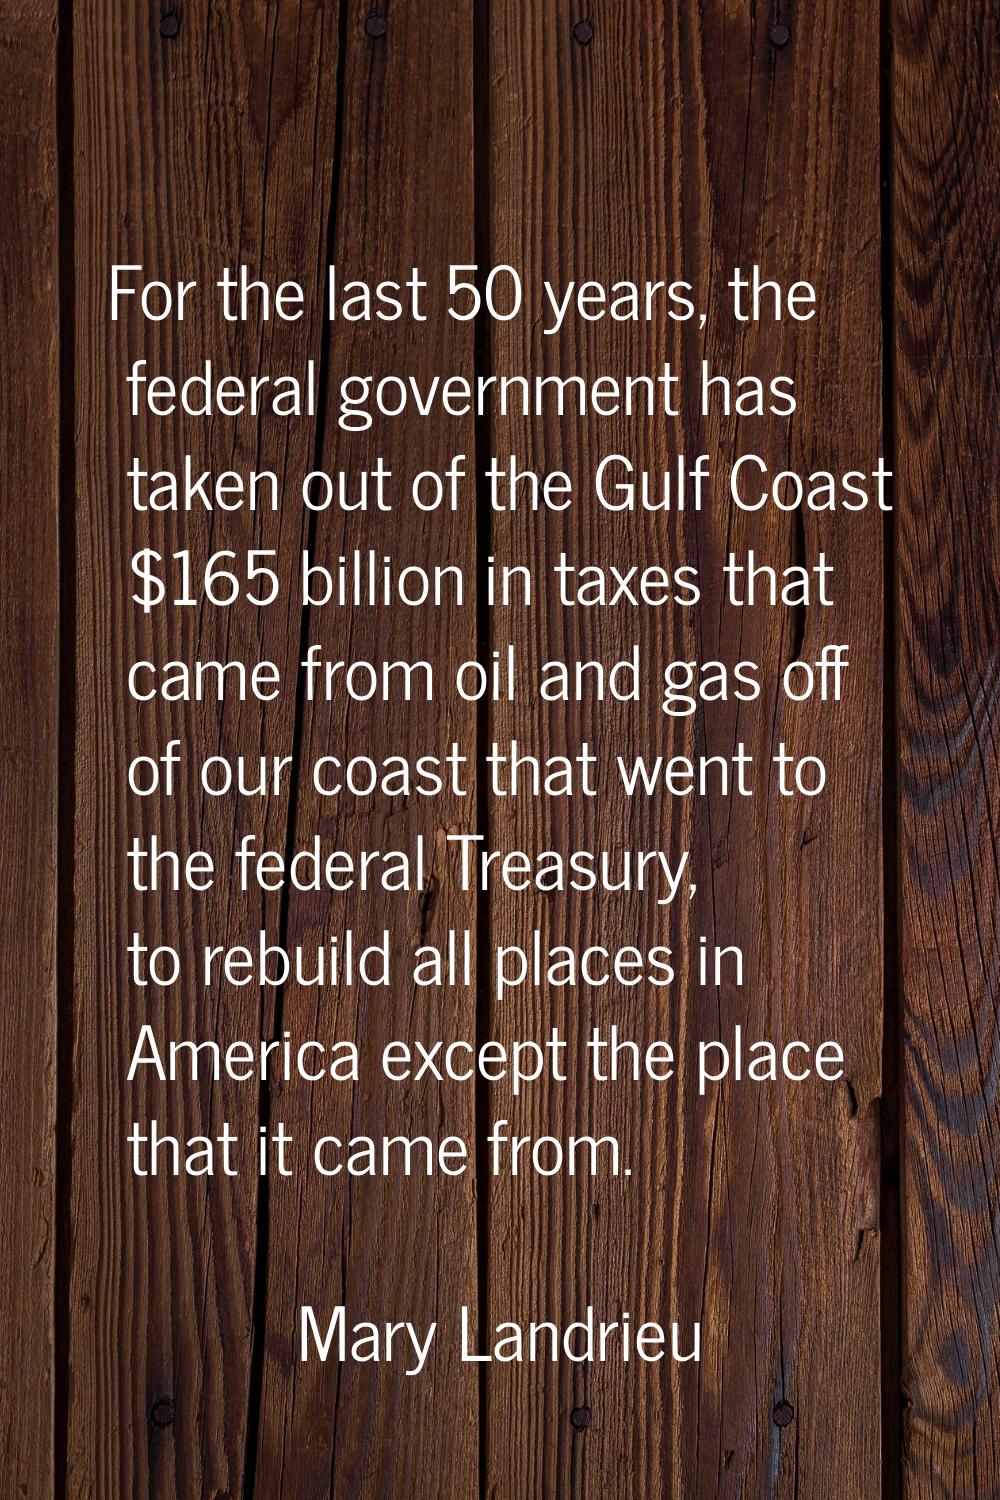 For the last 50 years, the federal government has taken out of the Gulf Coast $165 billion in taxes